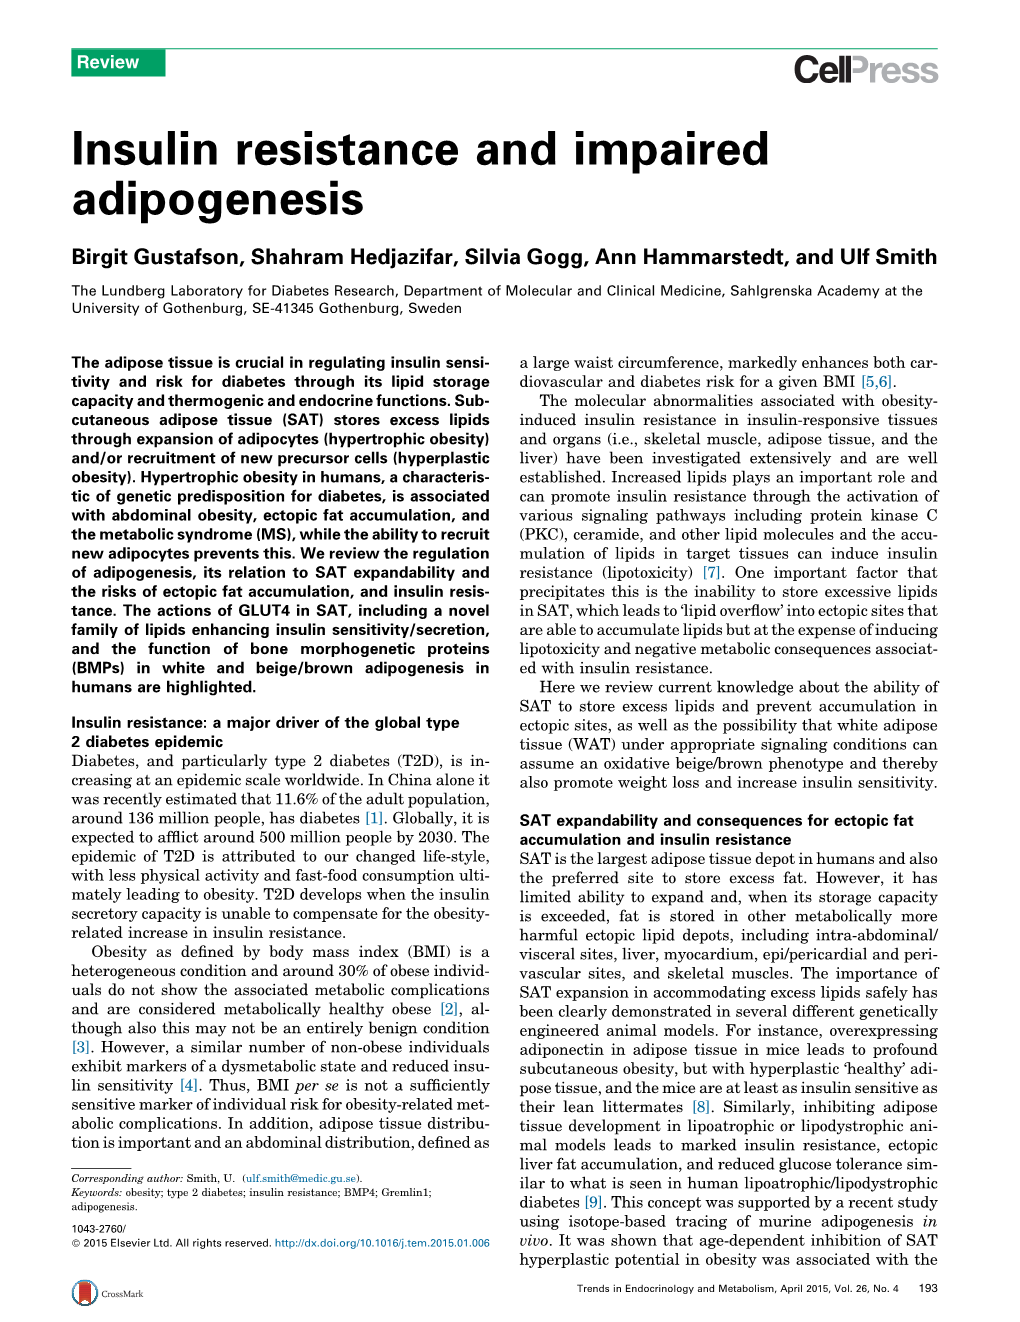 Insulin Resistance and Impaired Adipogenesis